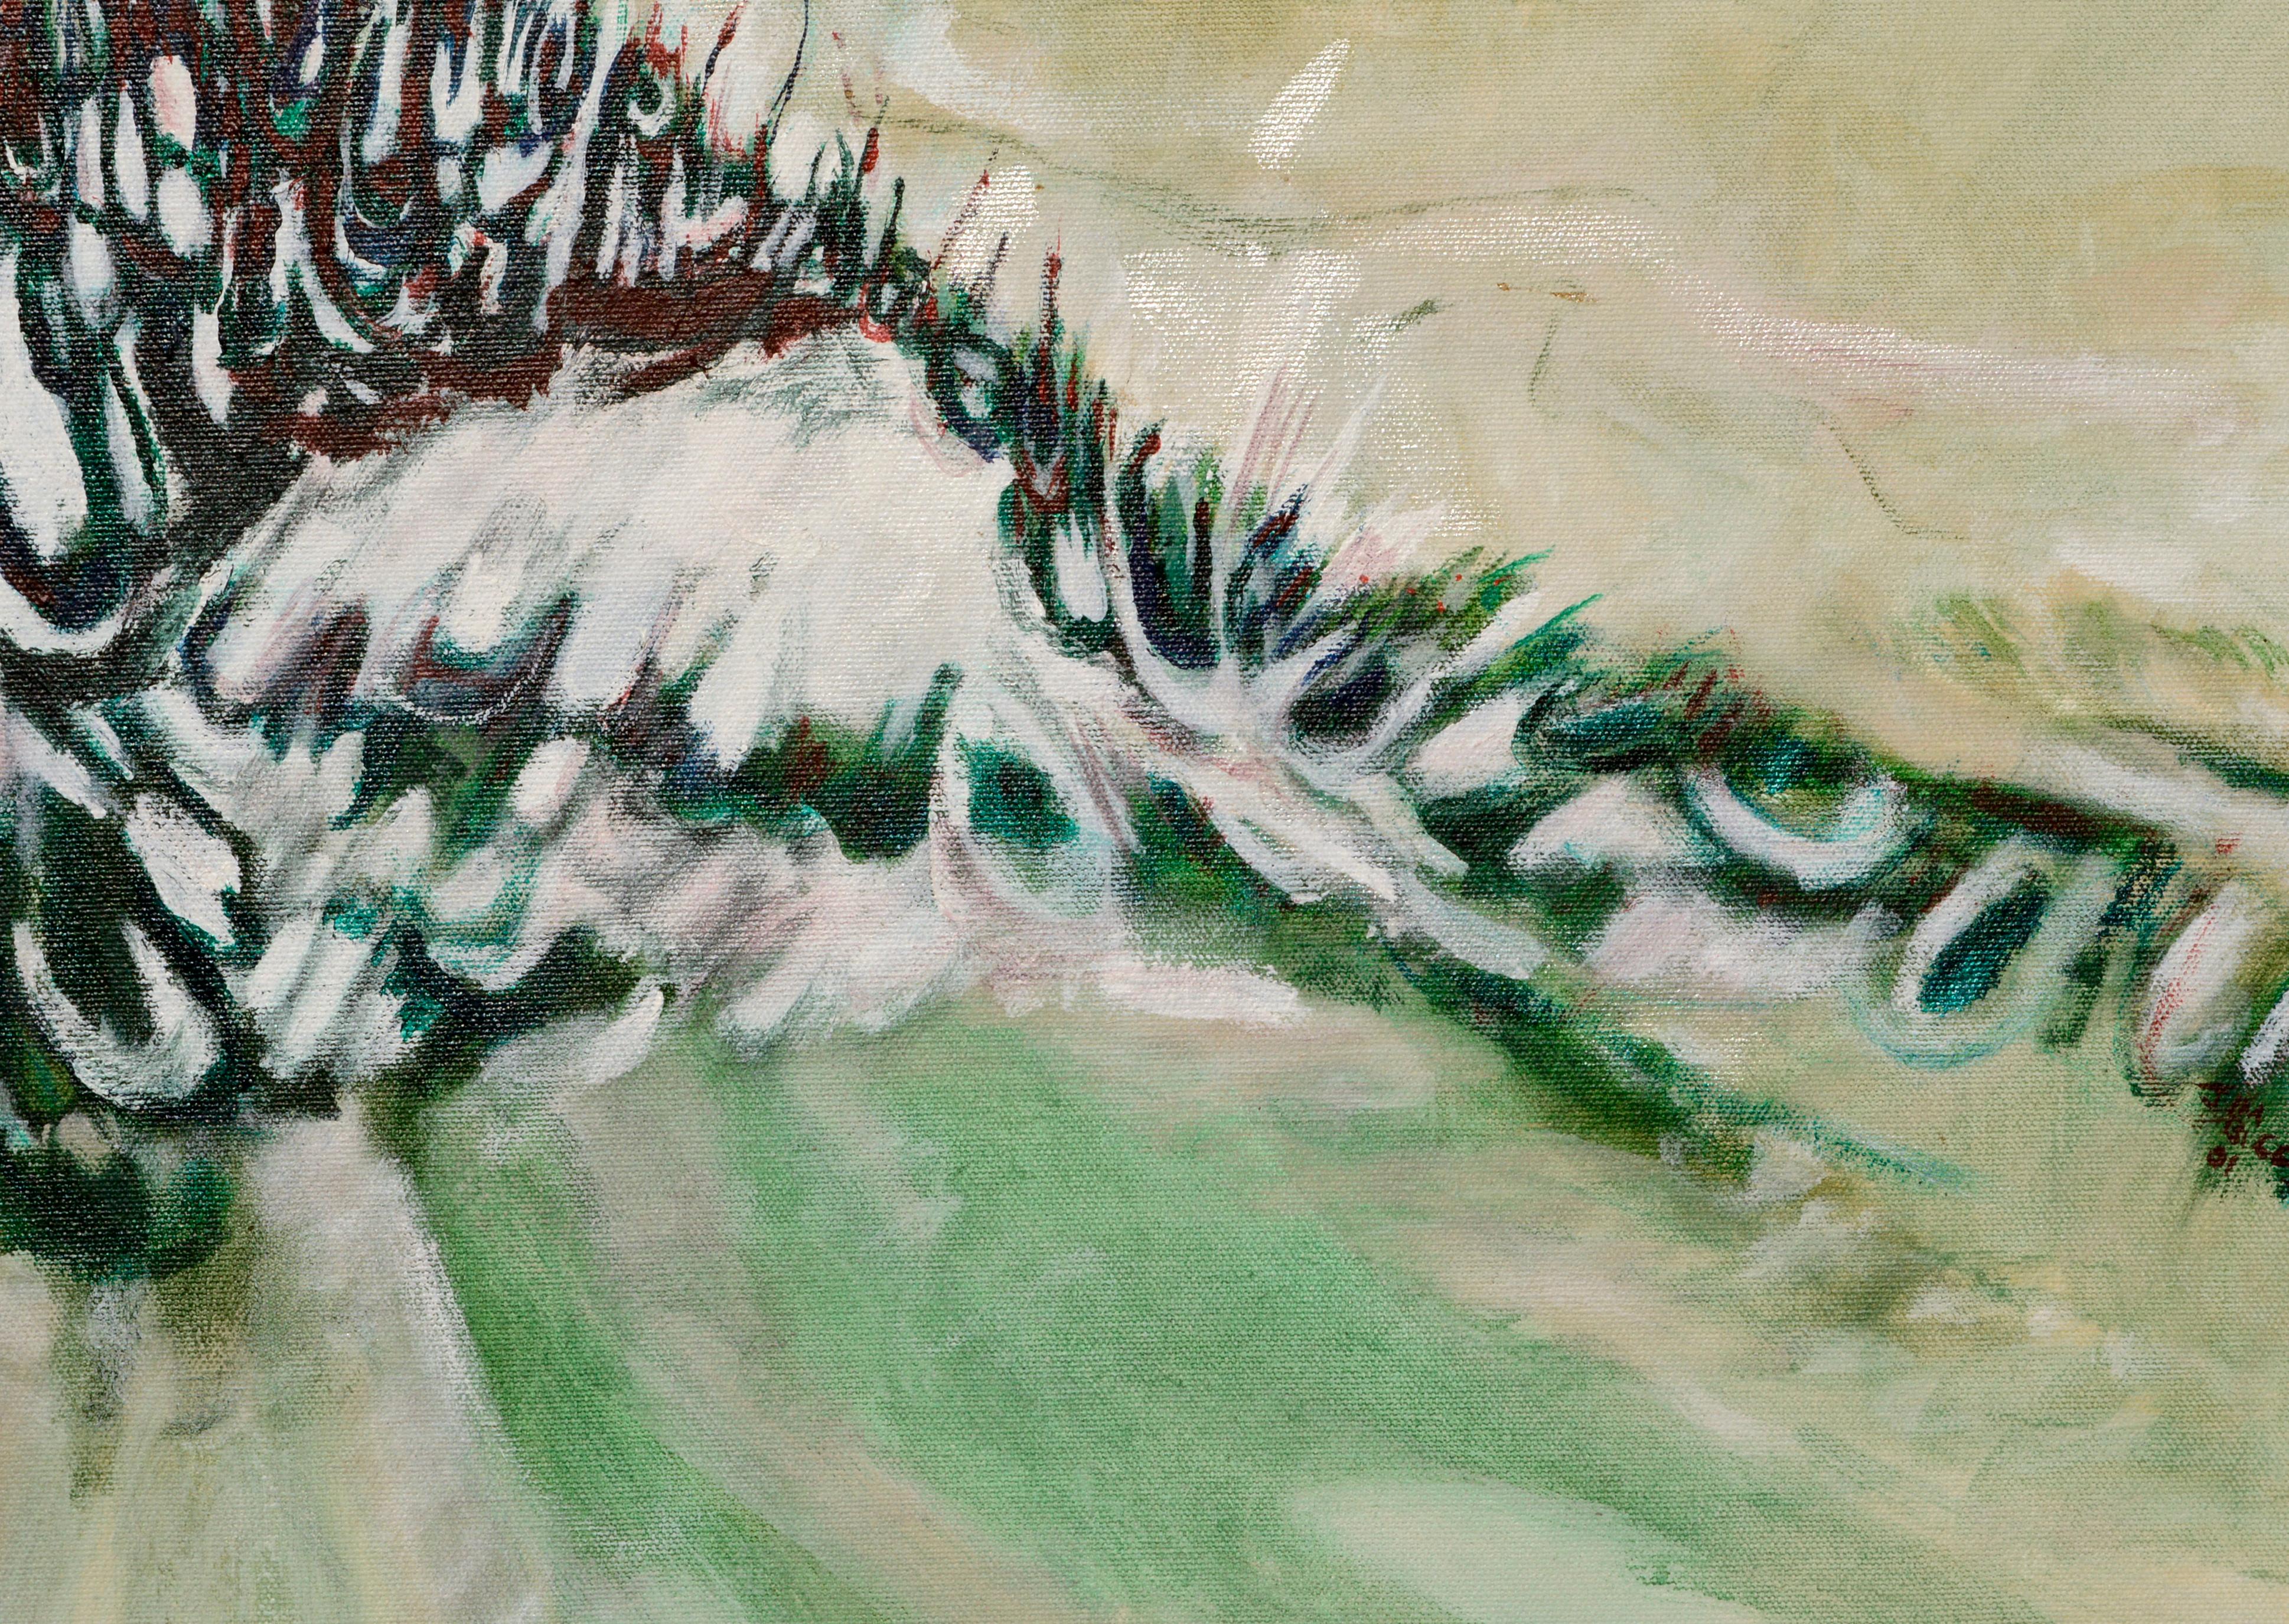 Sand Dune - Abstracted Landscape - American Impressionist Painting by Unknown